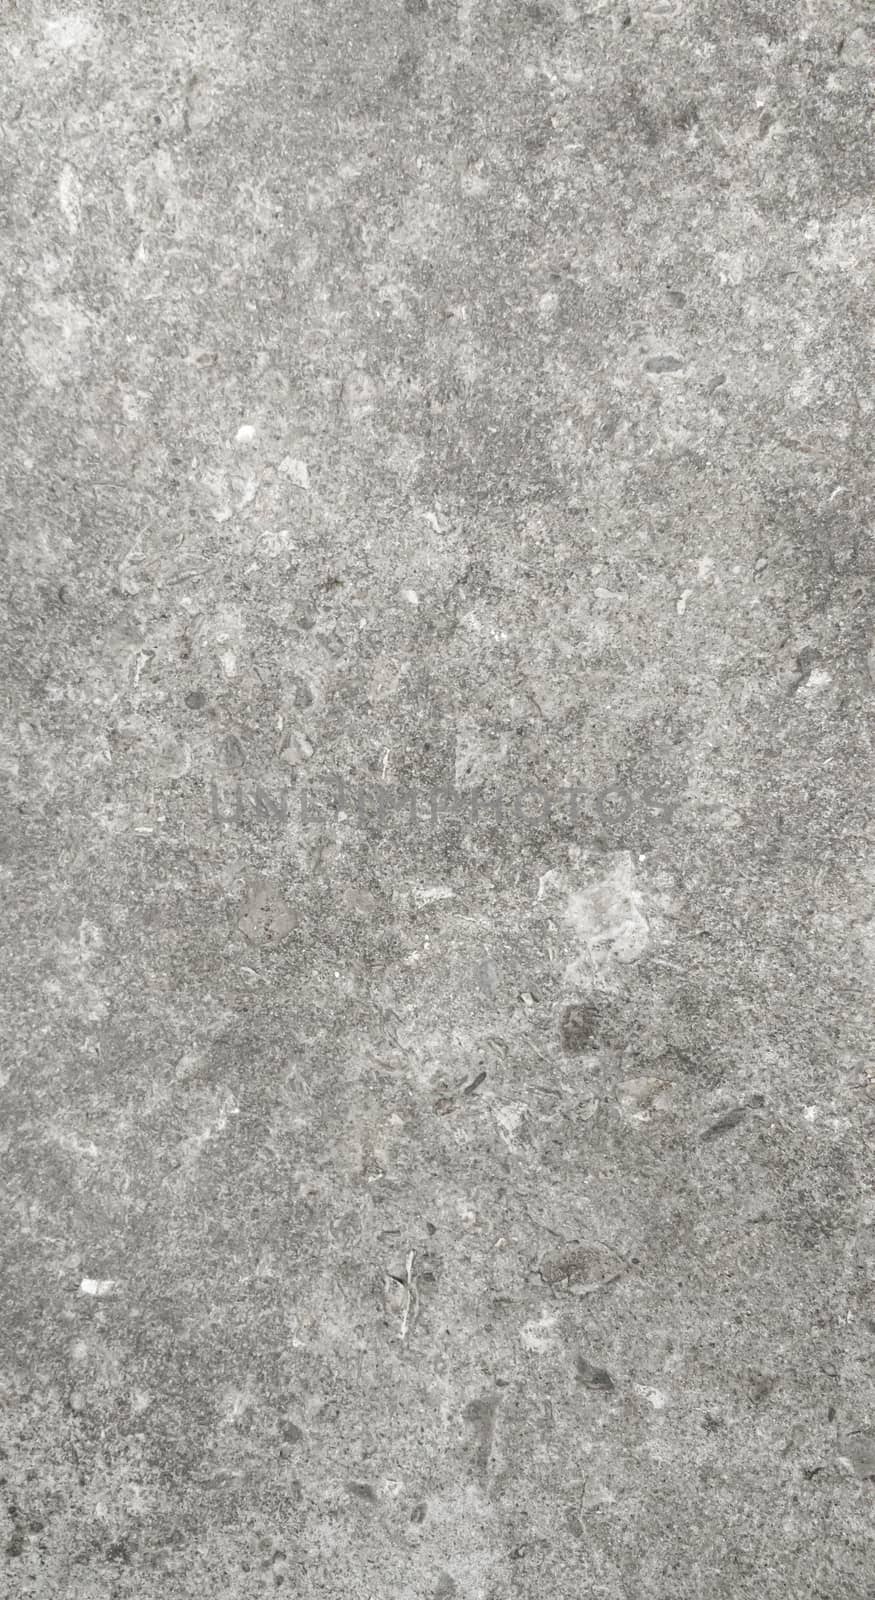 Concrete gray wall, concrete texture Texture of wall